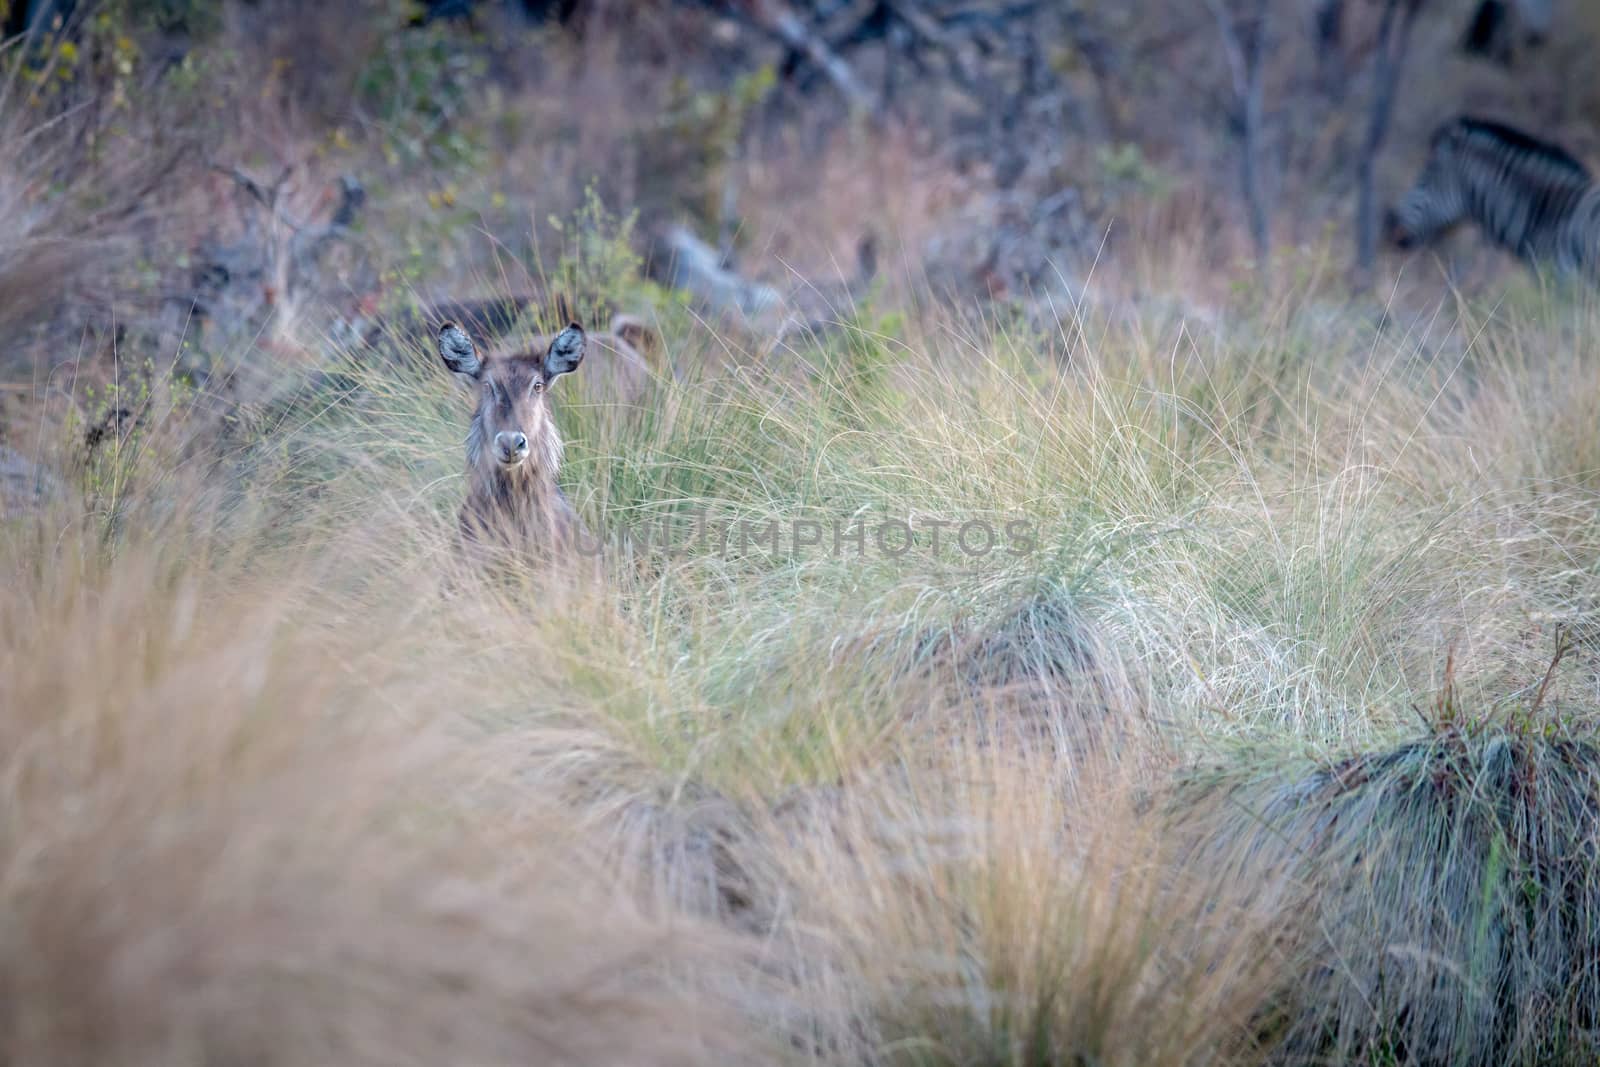 Waterbuck starring from behind the high grass. by Simoneemanphotography